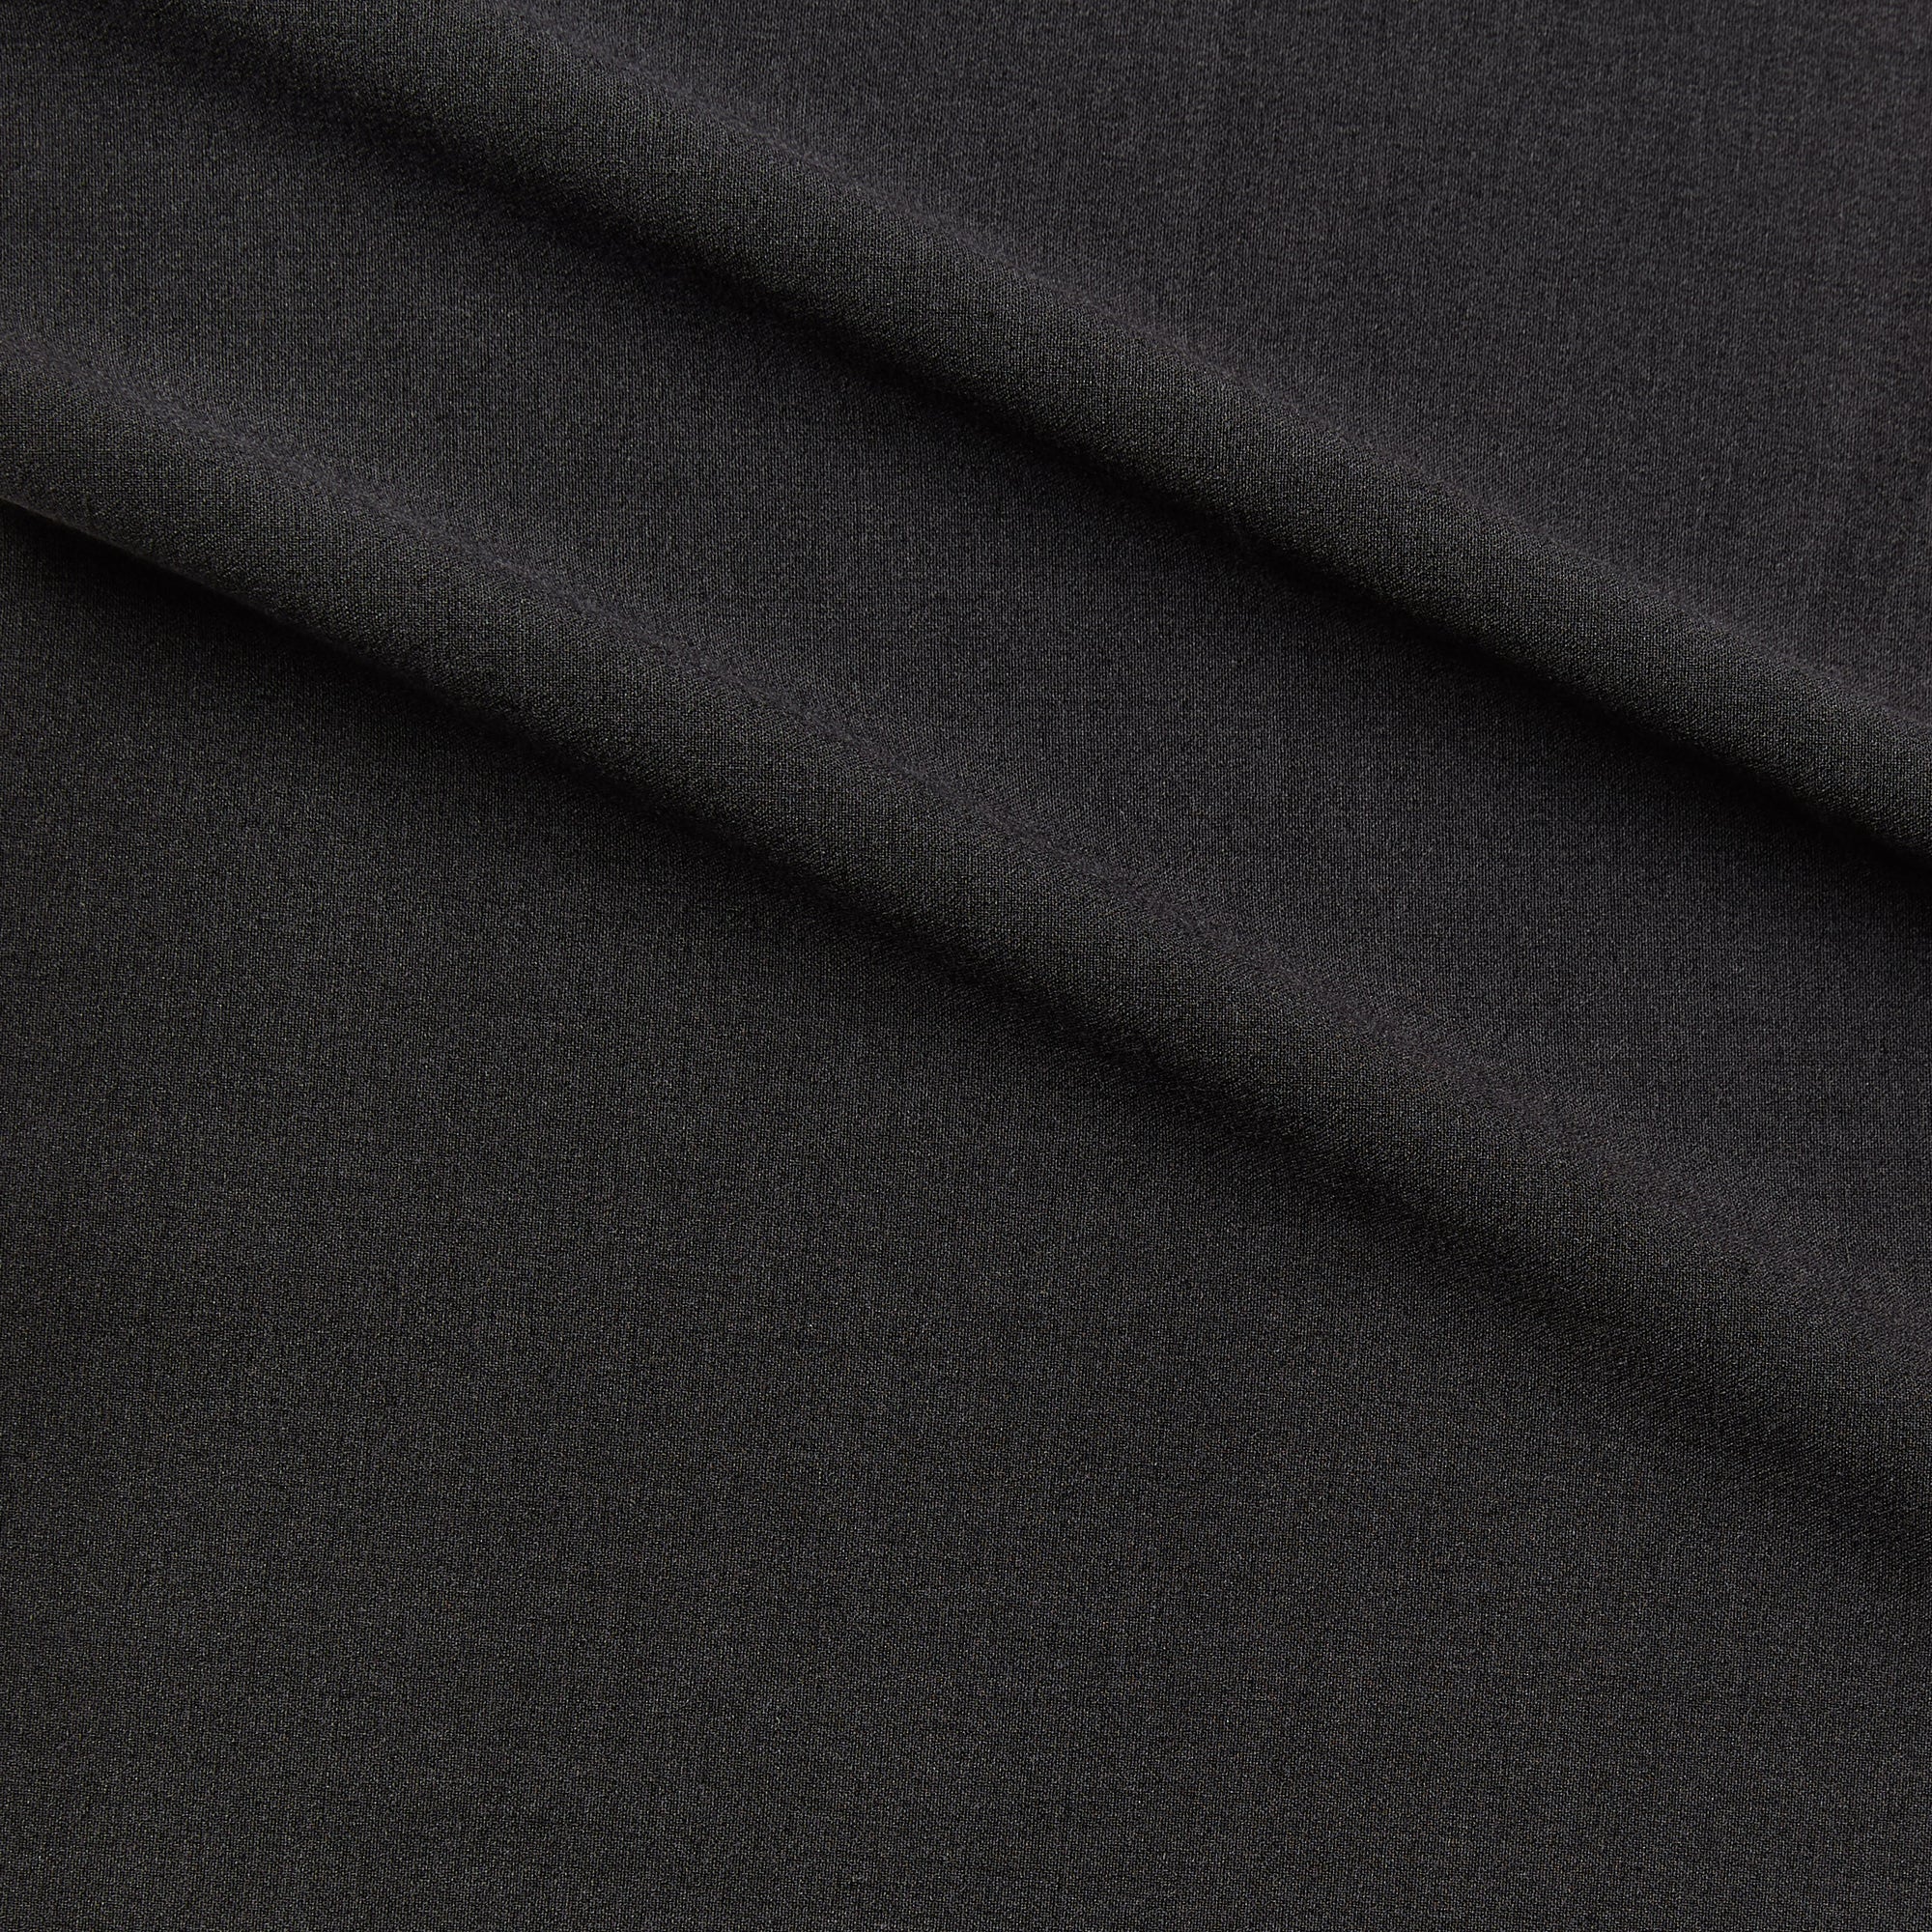 zara plain displaying the charcoal color version of a two-way stretch soft polyester and rayon with added spandex